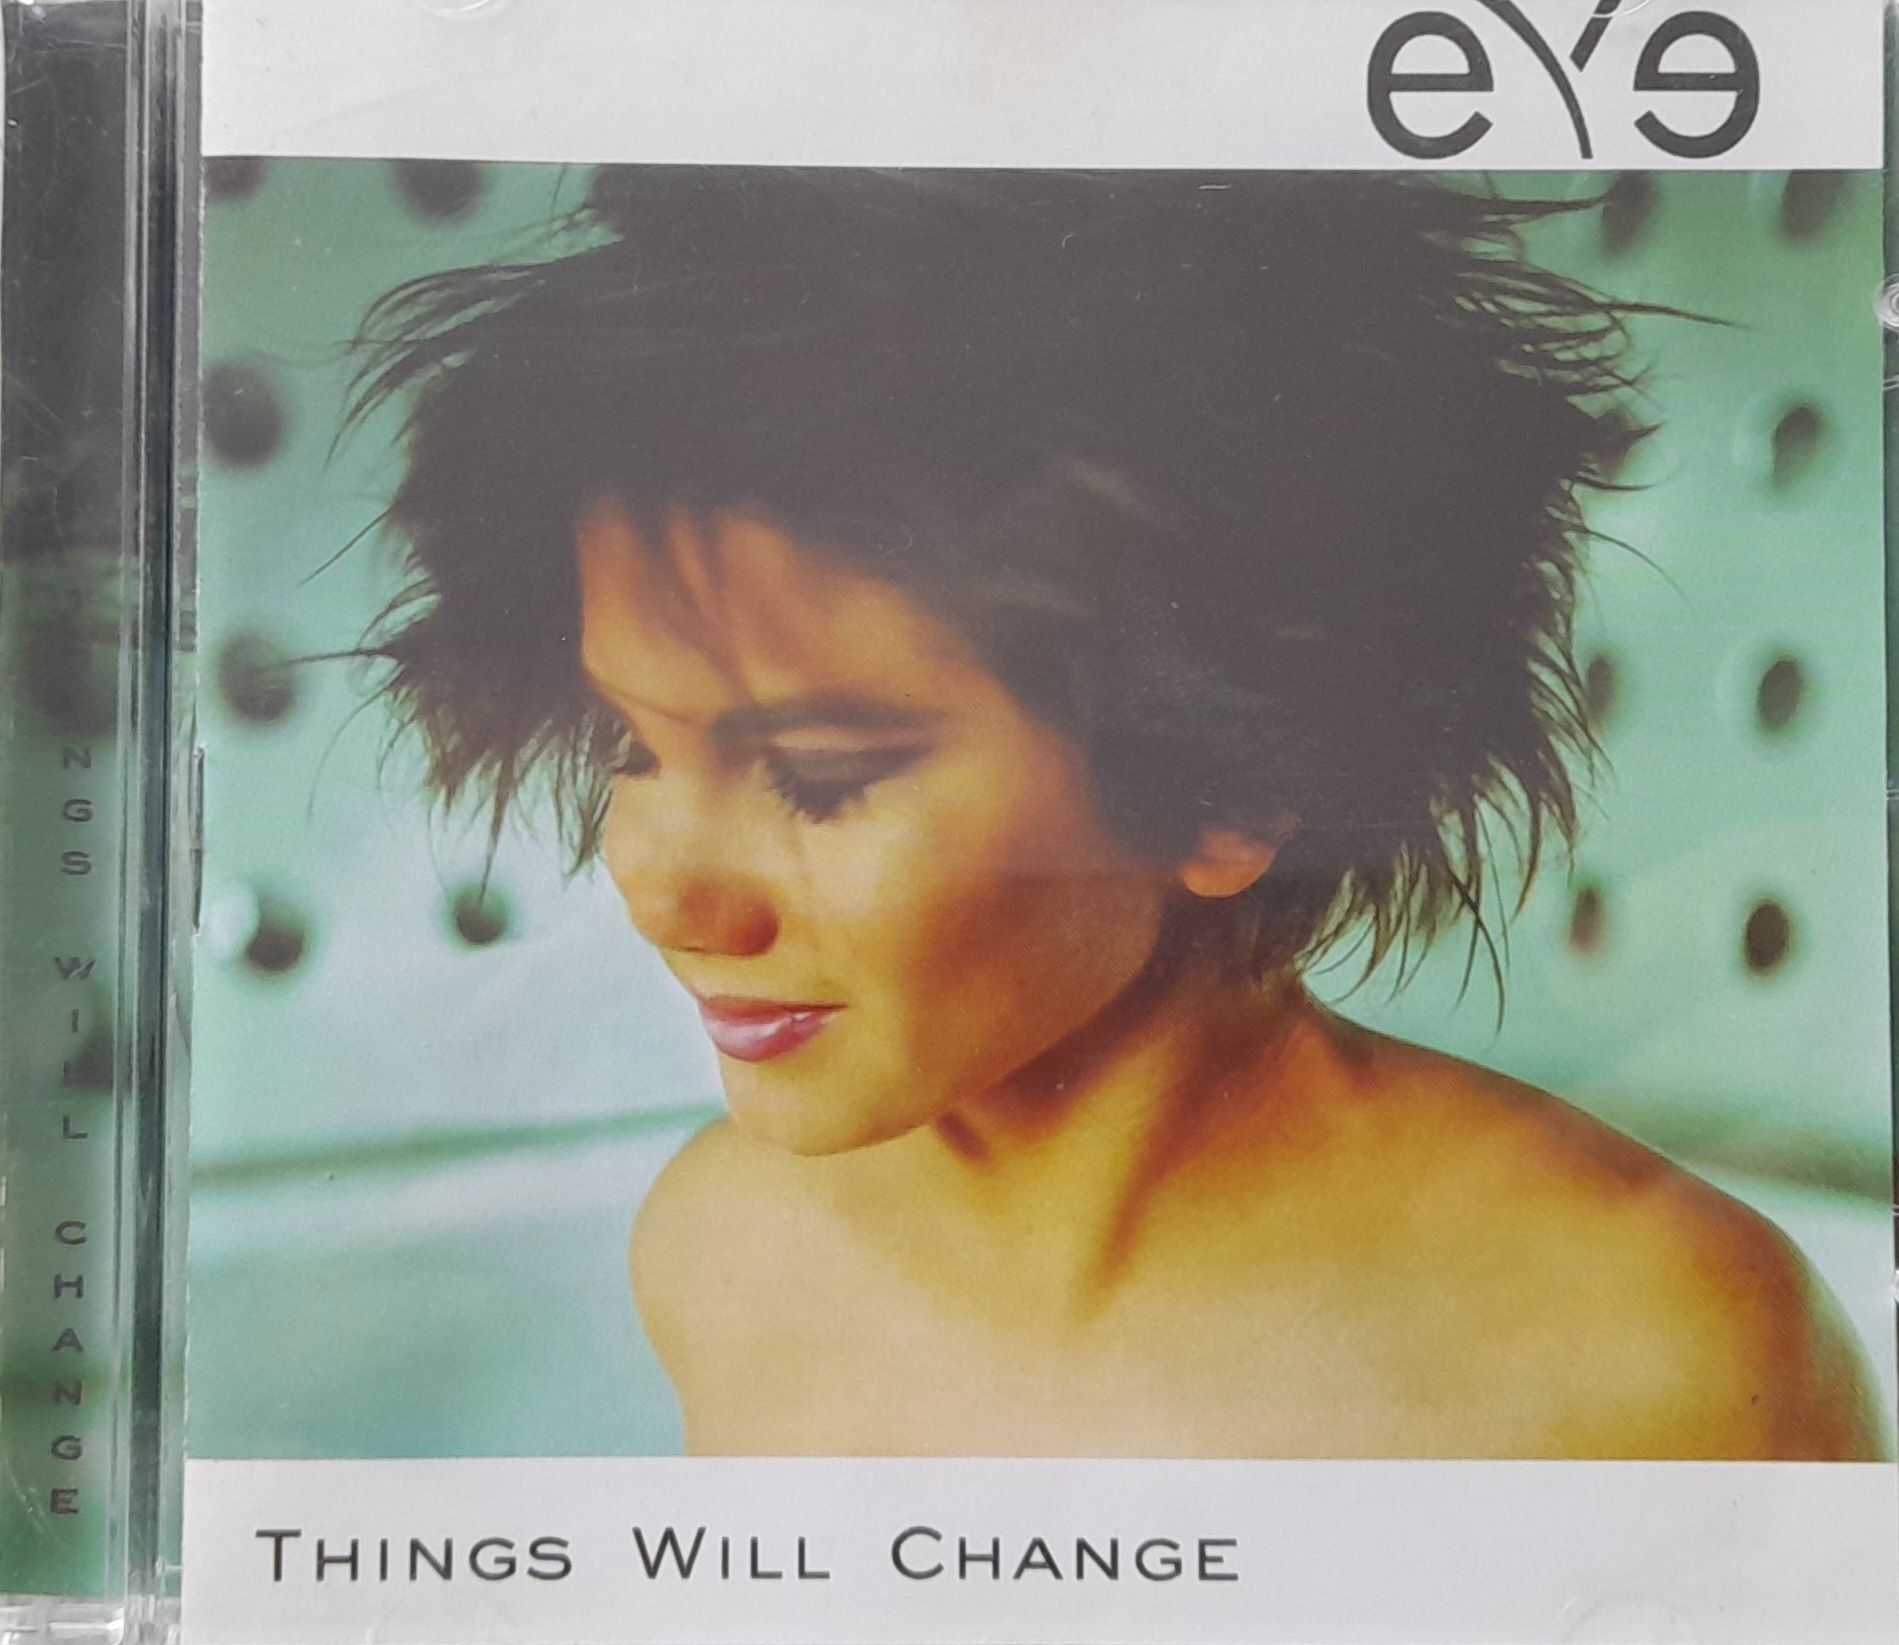 CD Eye - Thinds will Change 5€